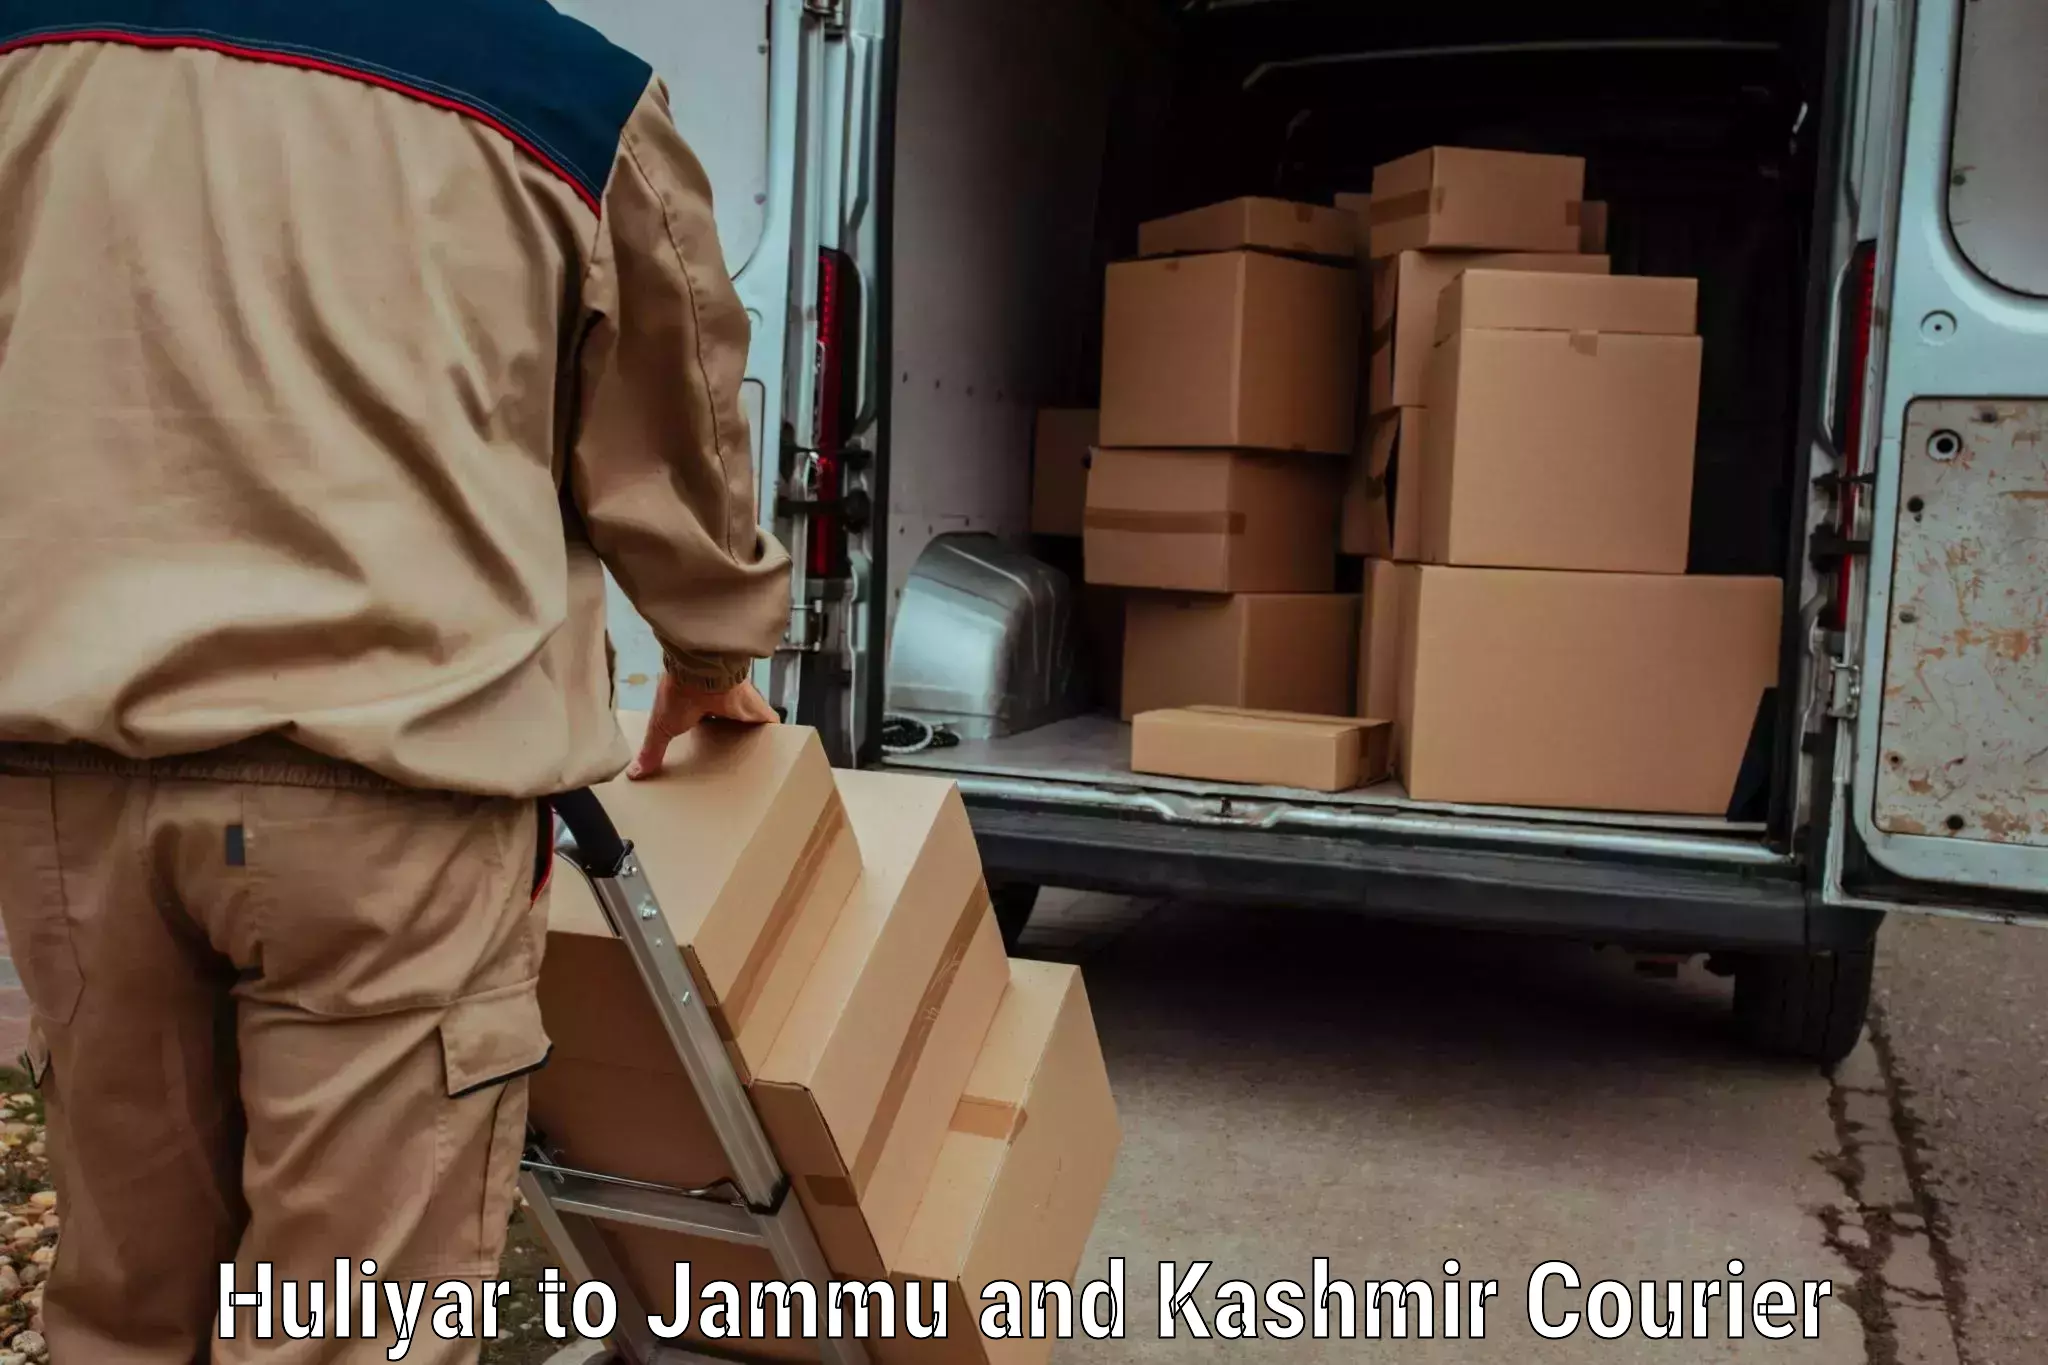 Multi-national courier services Huliyar to Udhampur